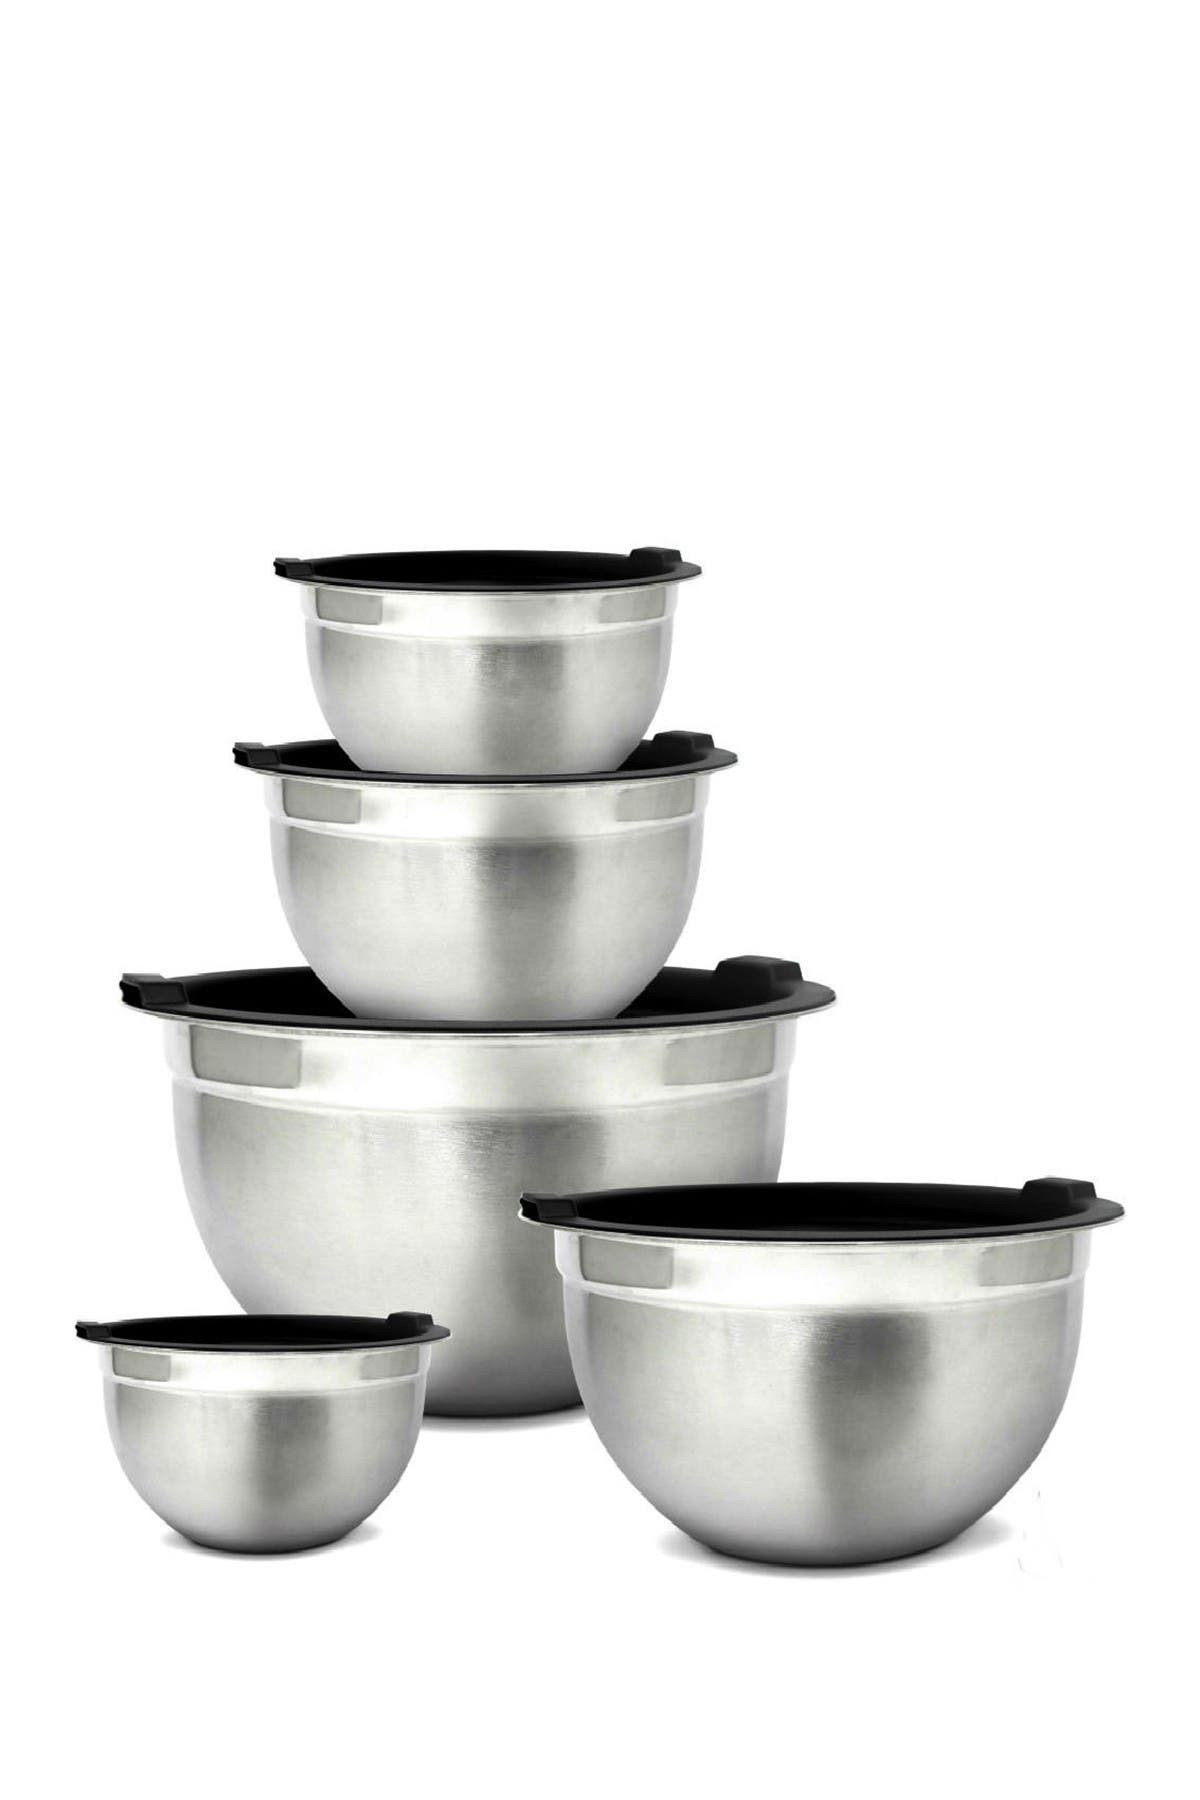 6-Piece Stainless Steel Metal Bowls by Umite Mixing Bowls with Airtight Lids